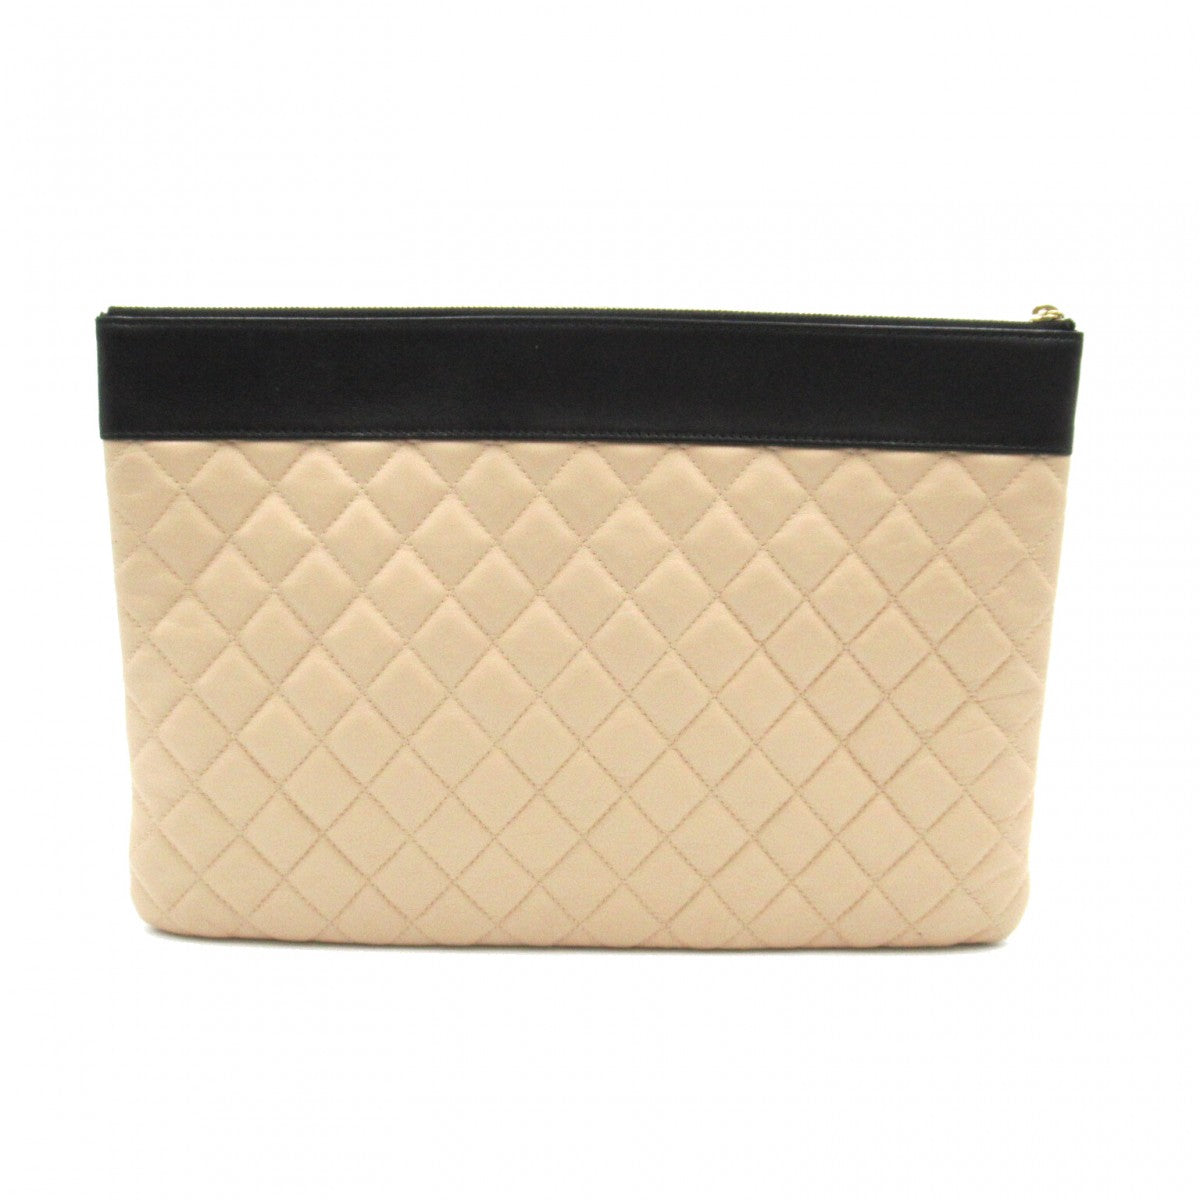 Quilted Leather Zip Clutch